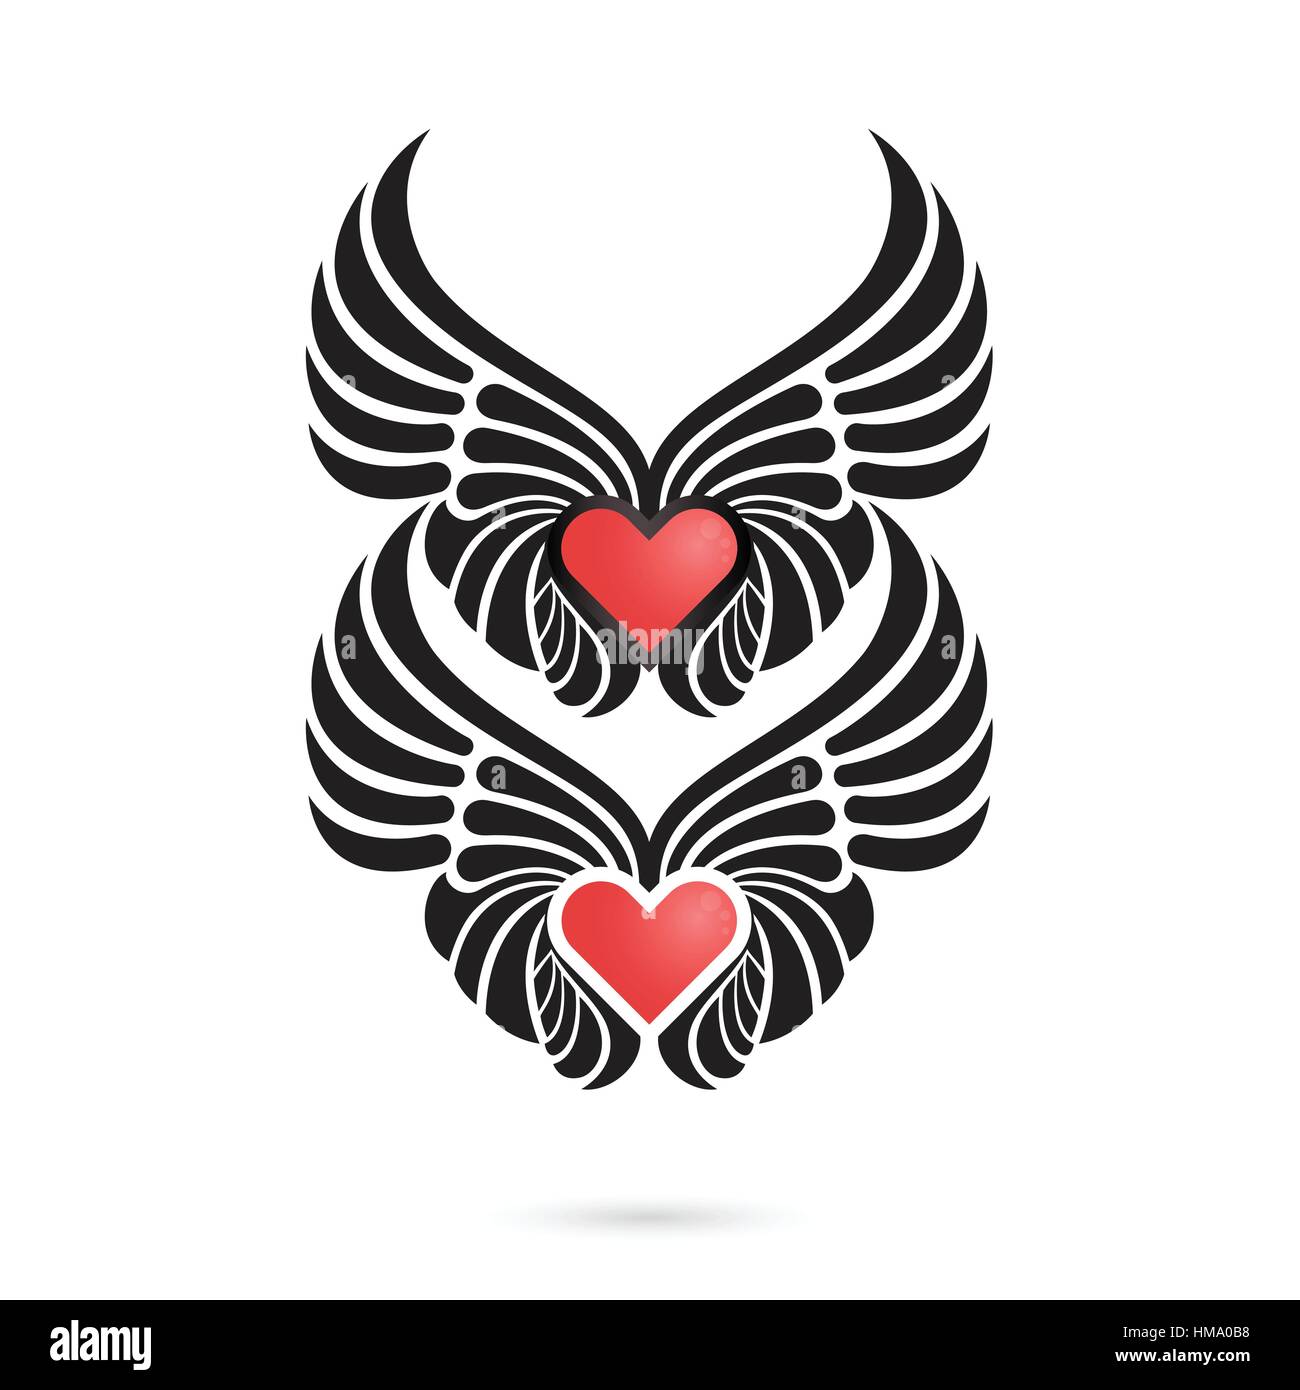 Heart logo with angel wings on background.Happy Valentines day lettering card.Happy holiday concept.Vector illustration. Stock Vector